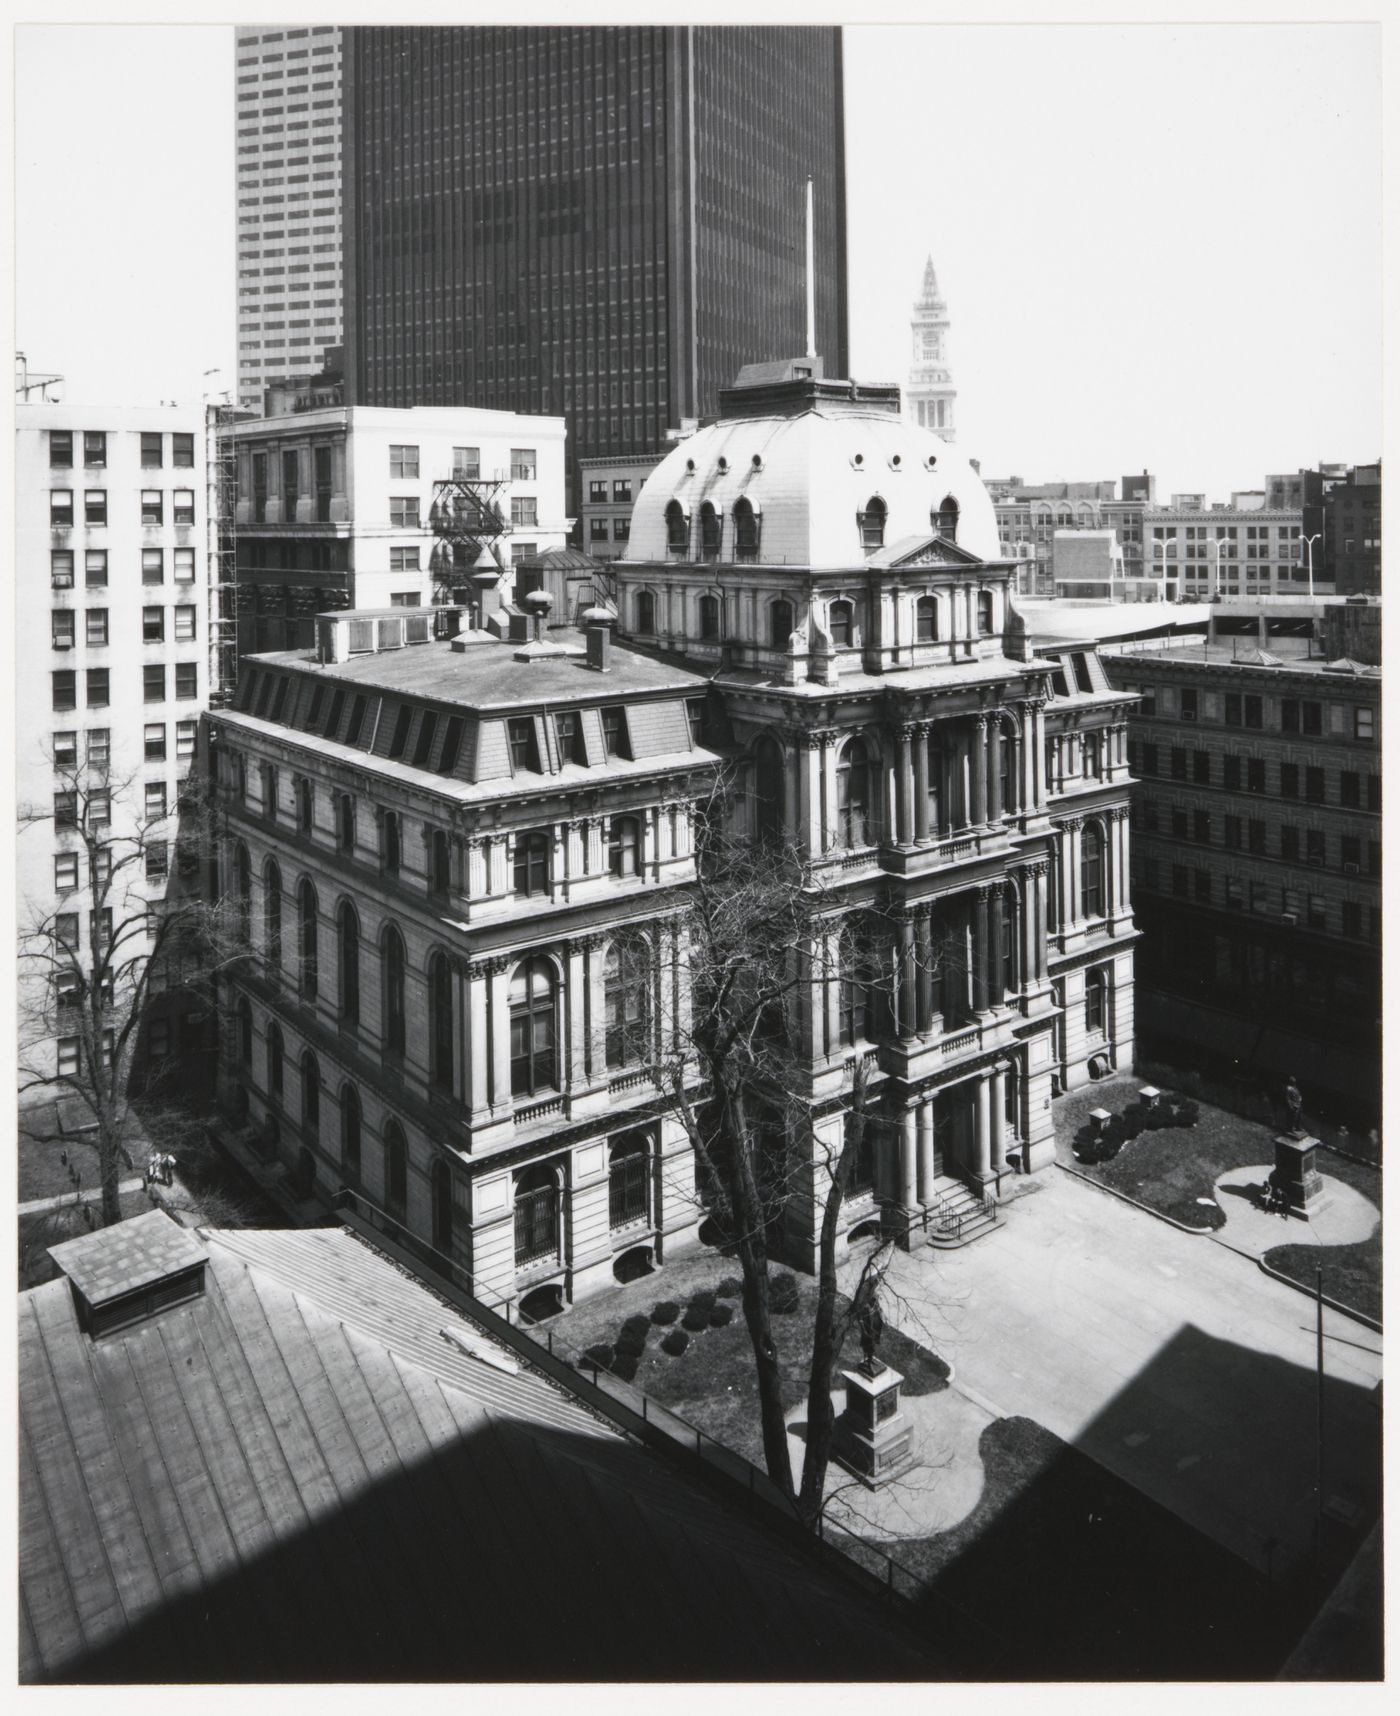 View of Old City Hall from The Parken House, Boston, Massachusetts, United States